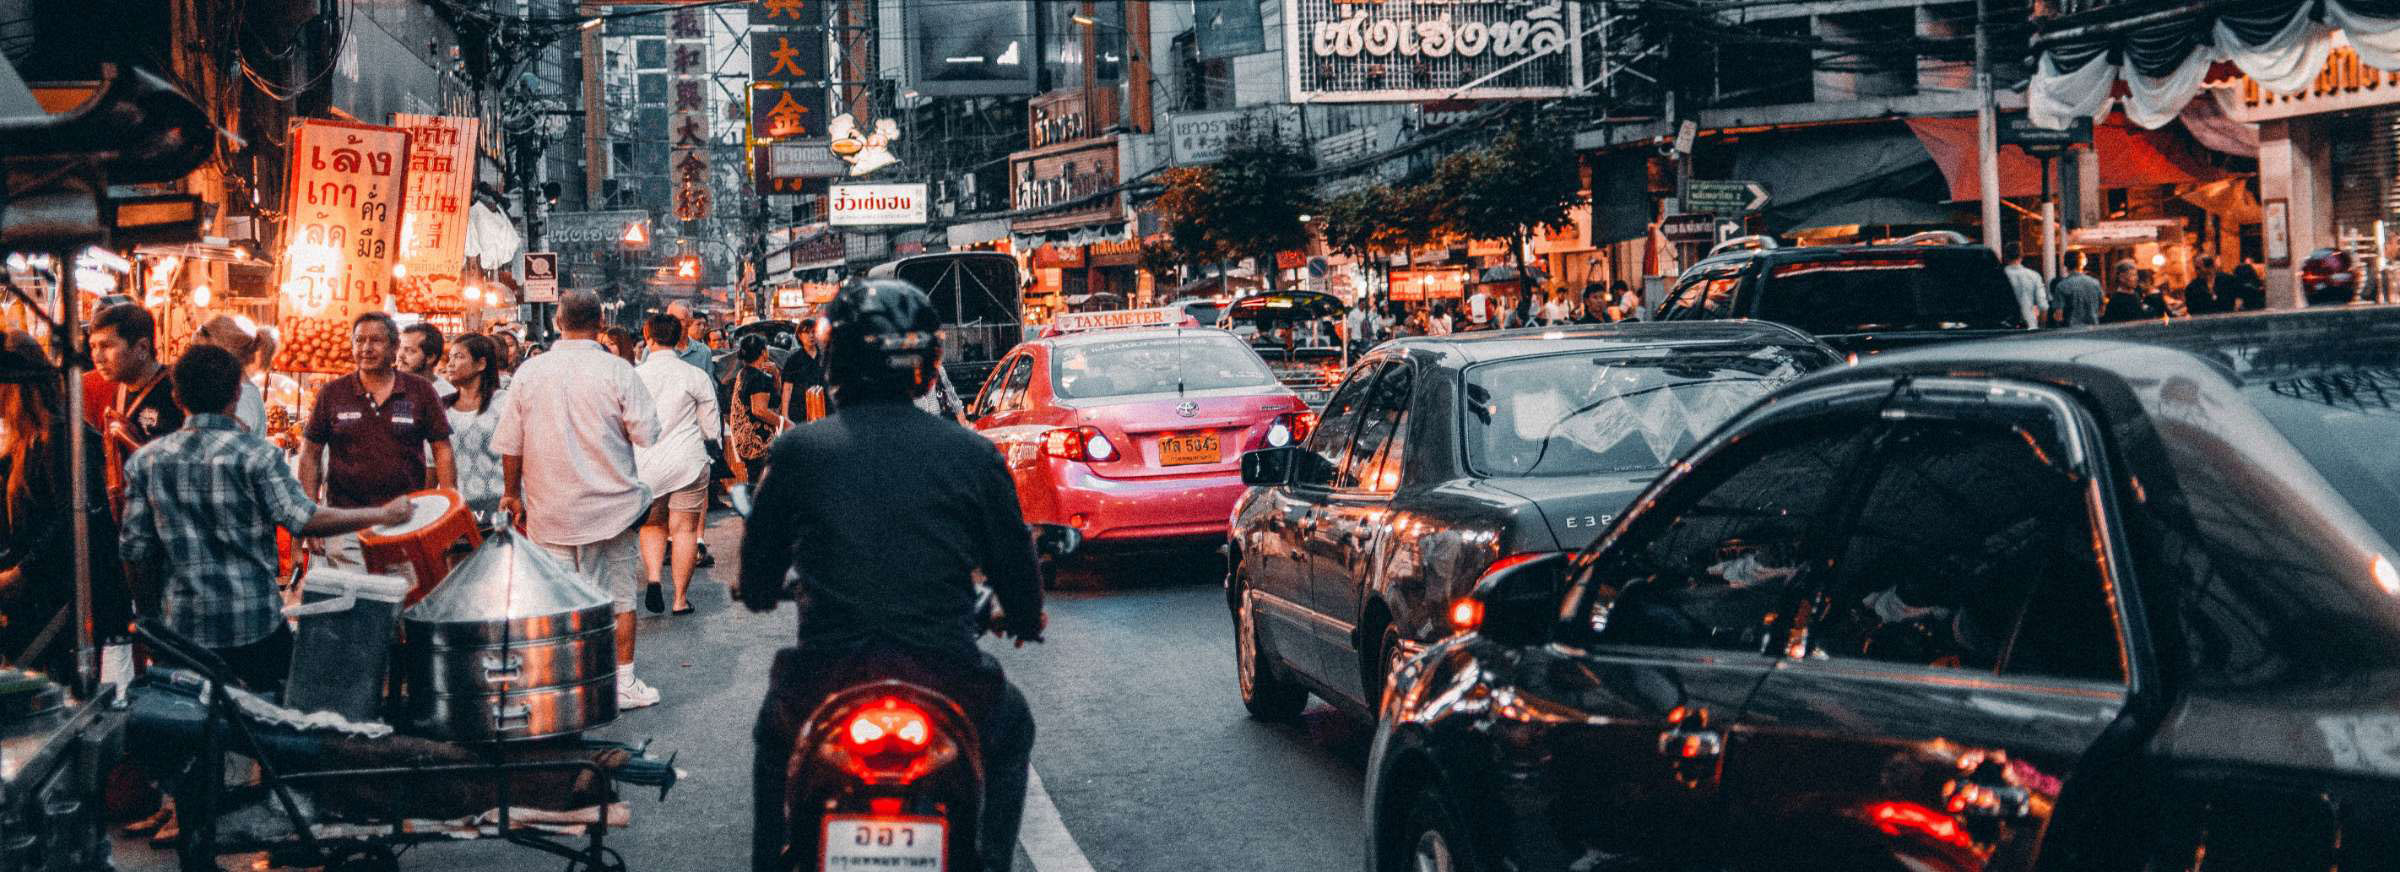 Busy street in Thailand